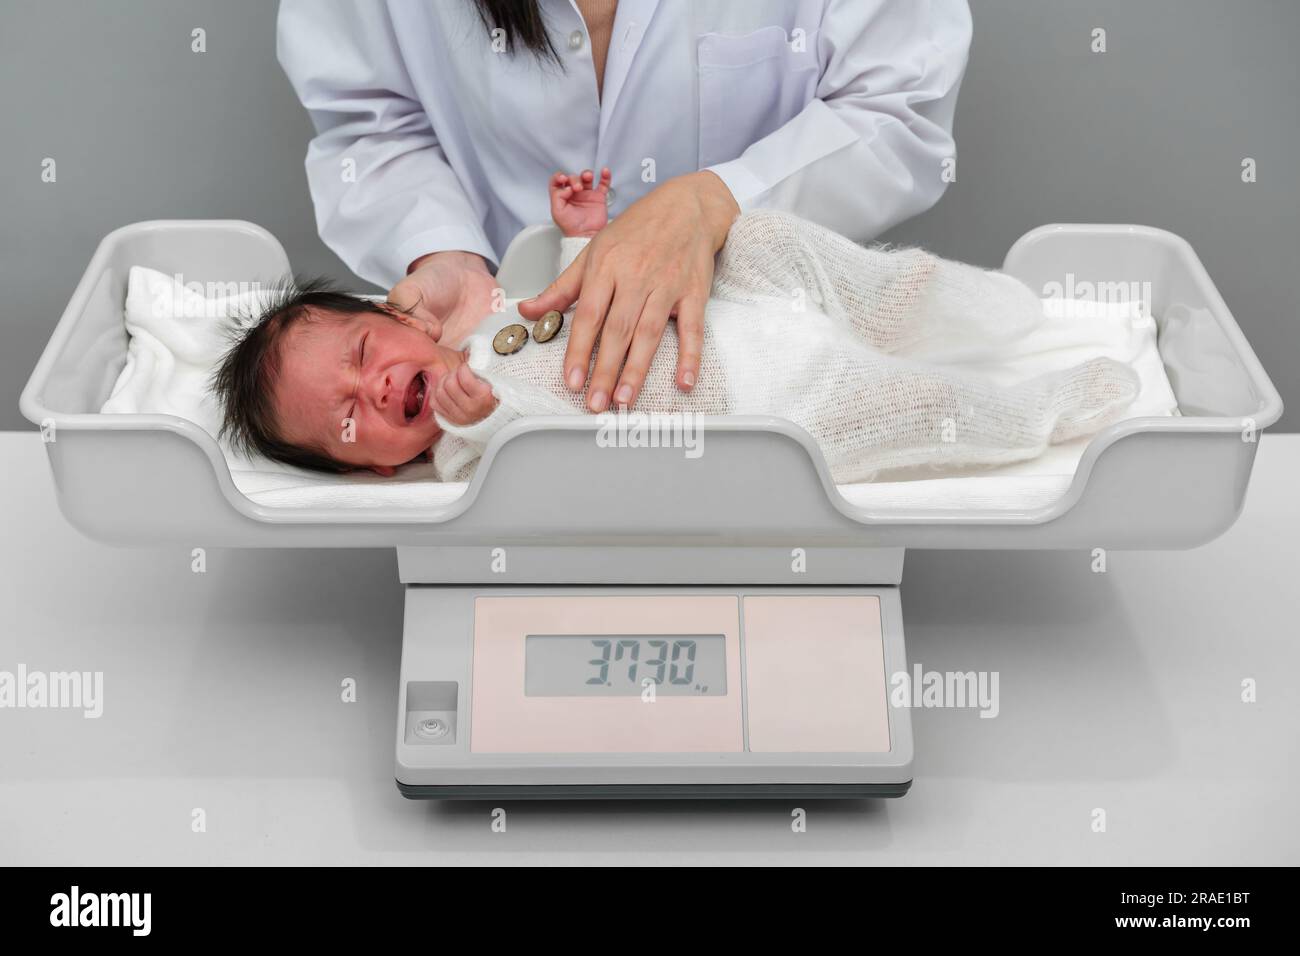 https://c8.alamy.com/comp/2RAE1BT/crying-newborn-baby-weight-measurement-on-the-digital-scales-with-doctor-in-hospital-2RAE1BT.jpg